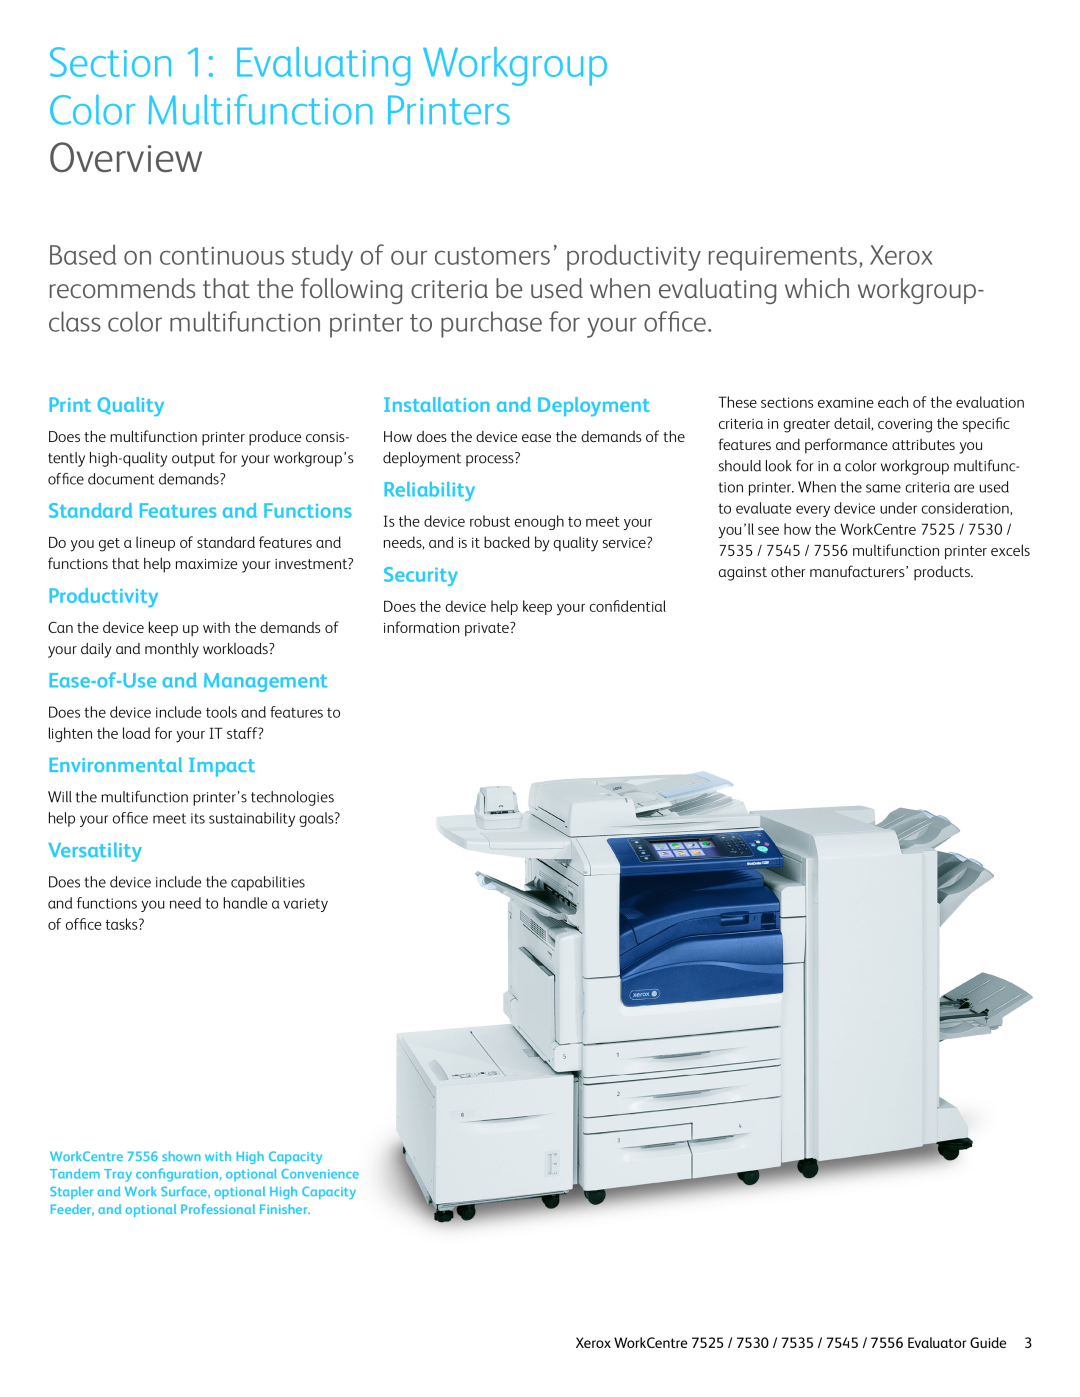 Xerox 7545 Evaluating Workgroup Color Multifunction Printers, Overview, Print Quality, Productivity, Reliability, Security 